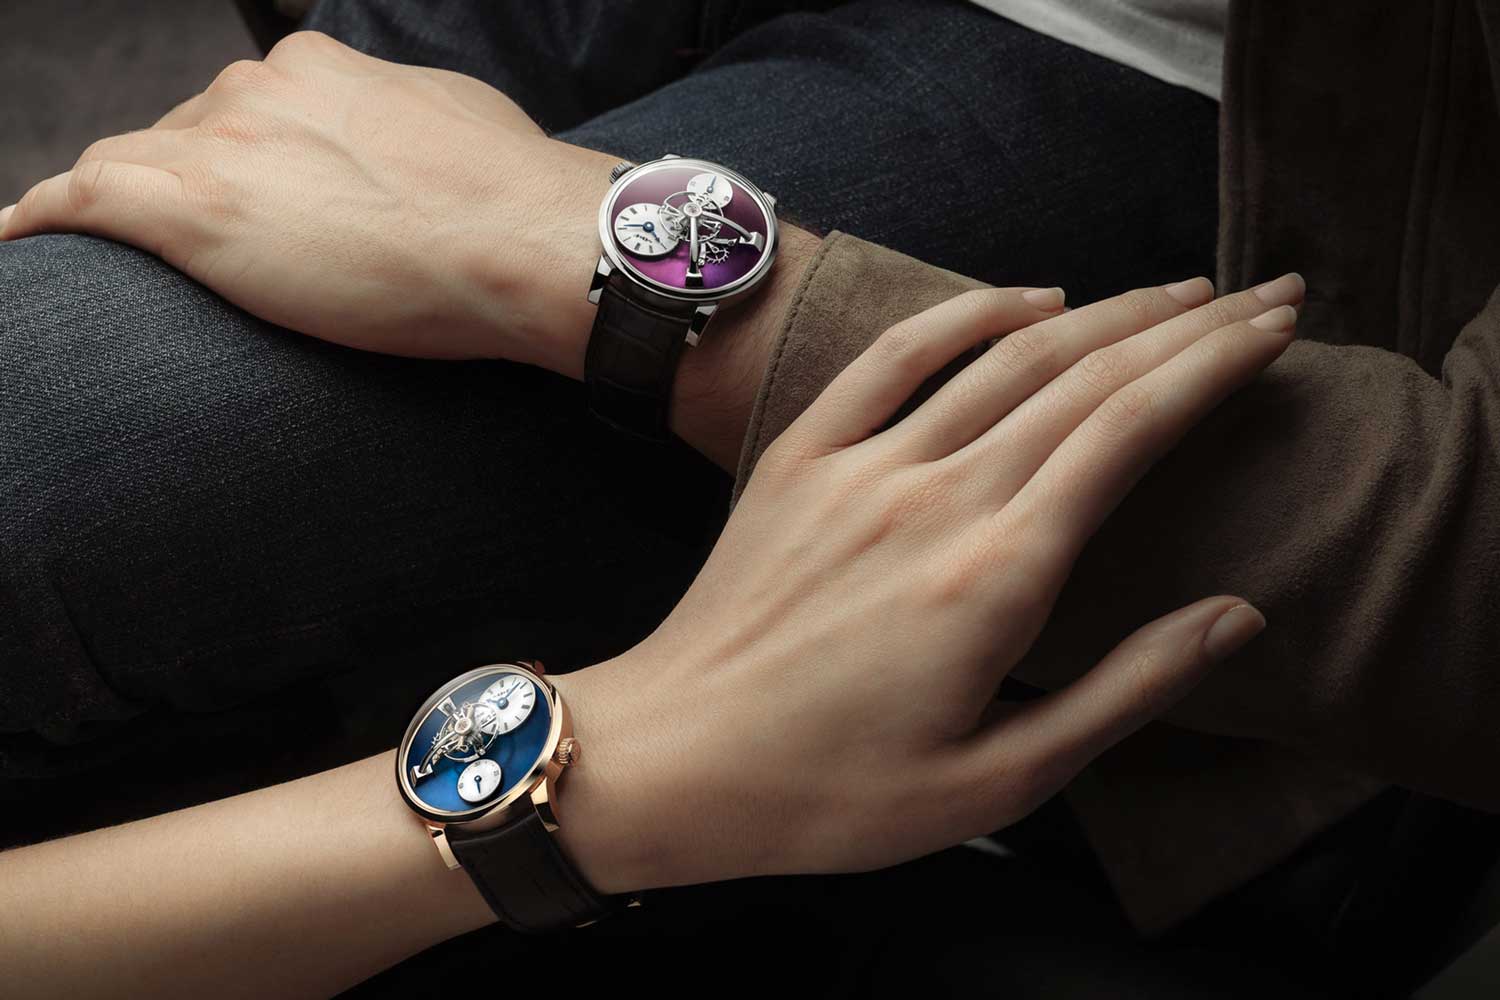 The watch is powered by a three-dimensional horological movement developed in-house by MB&F.